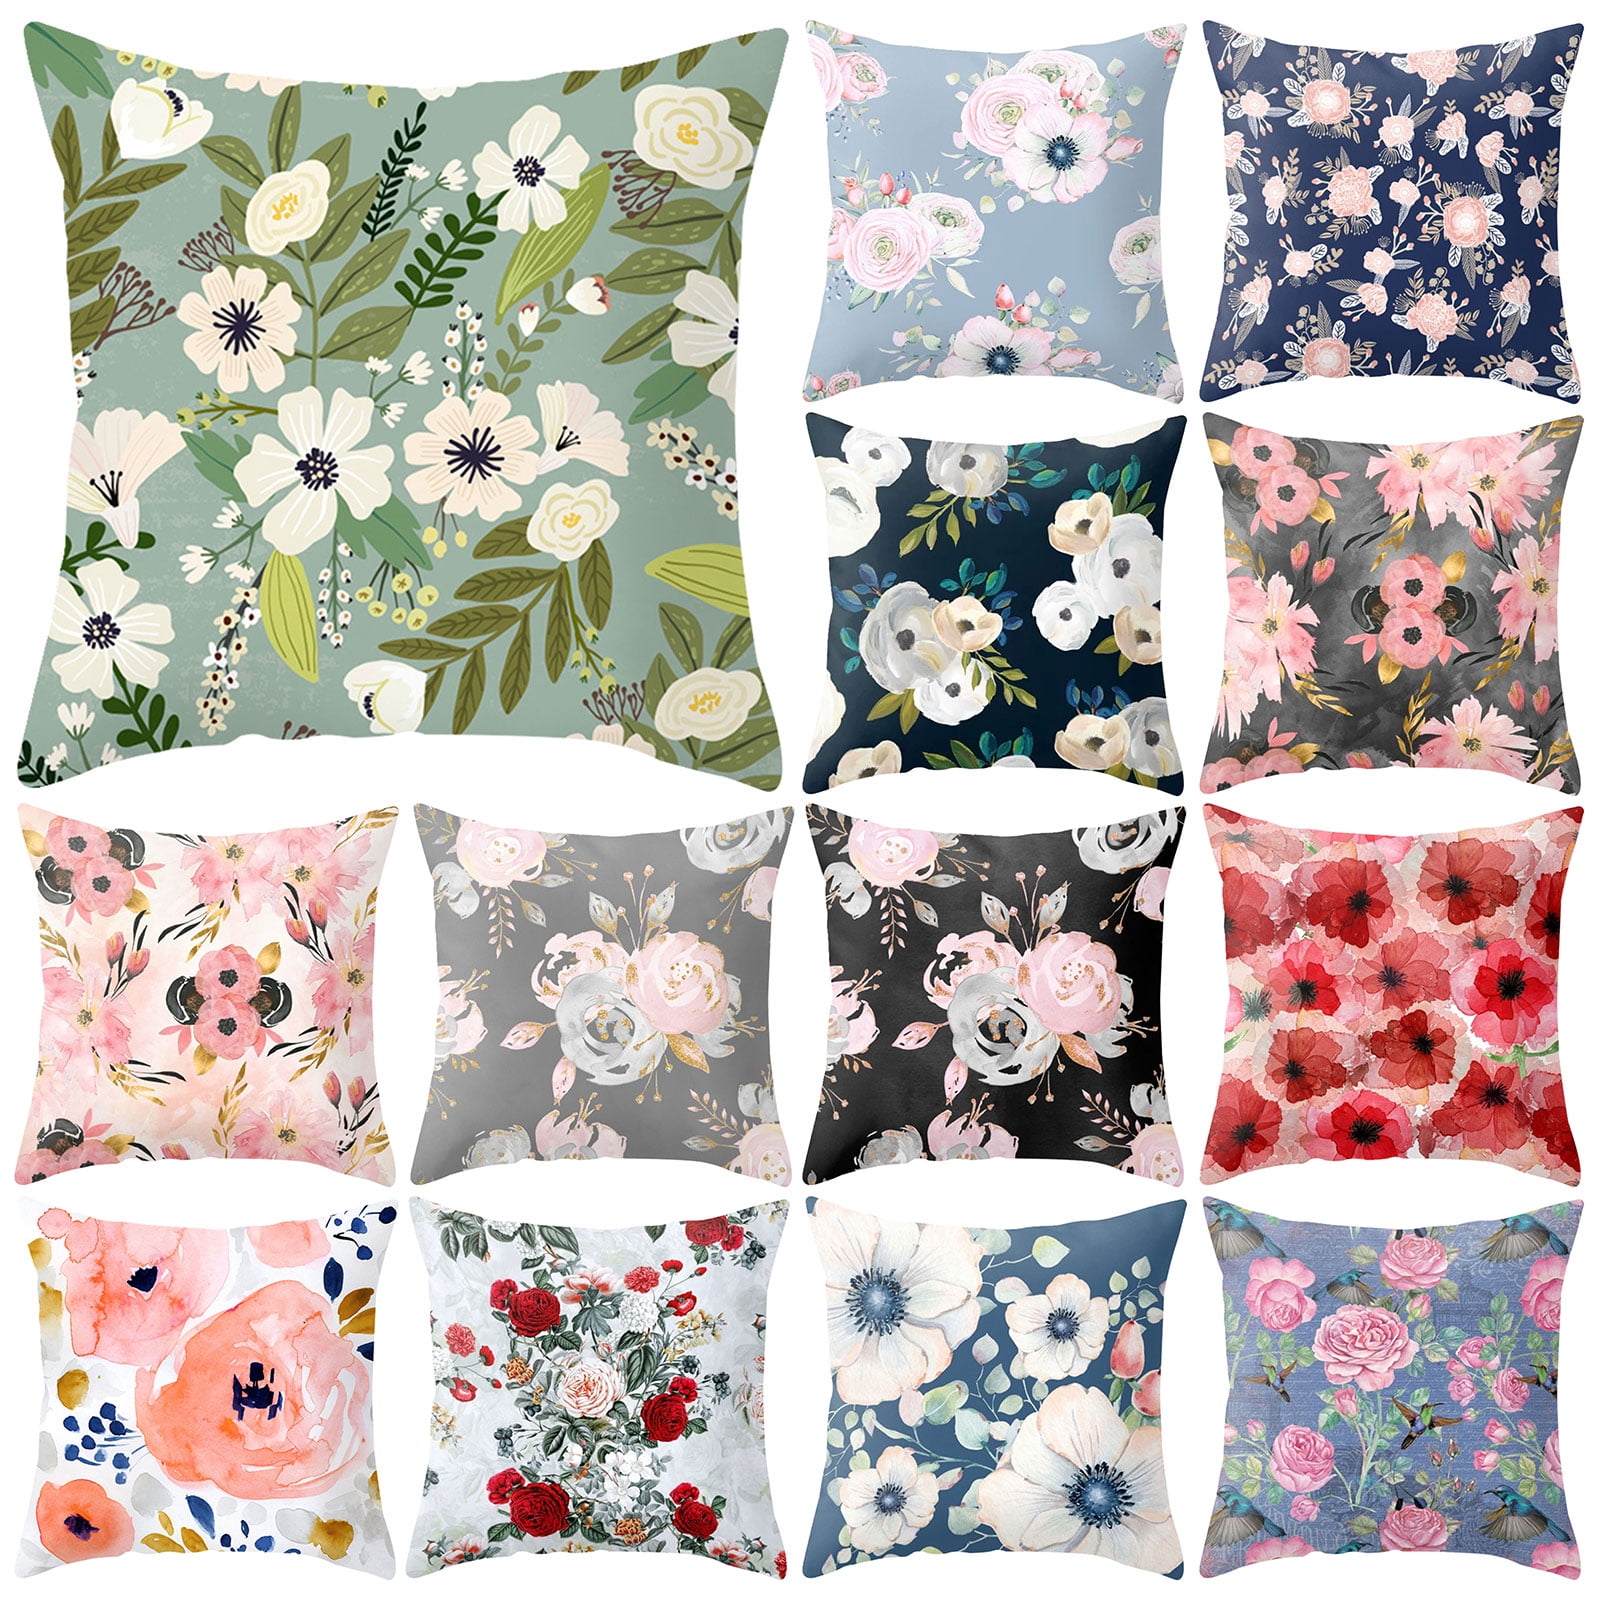 Details about   2pcs Pillow Cases Floral Bedroom Pillow Cushion Covers Home Bedding Pillowcase 